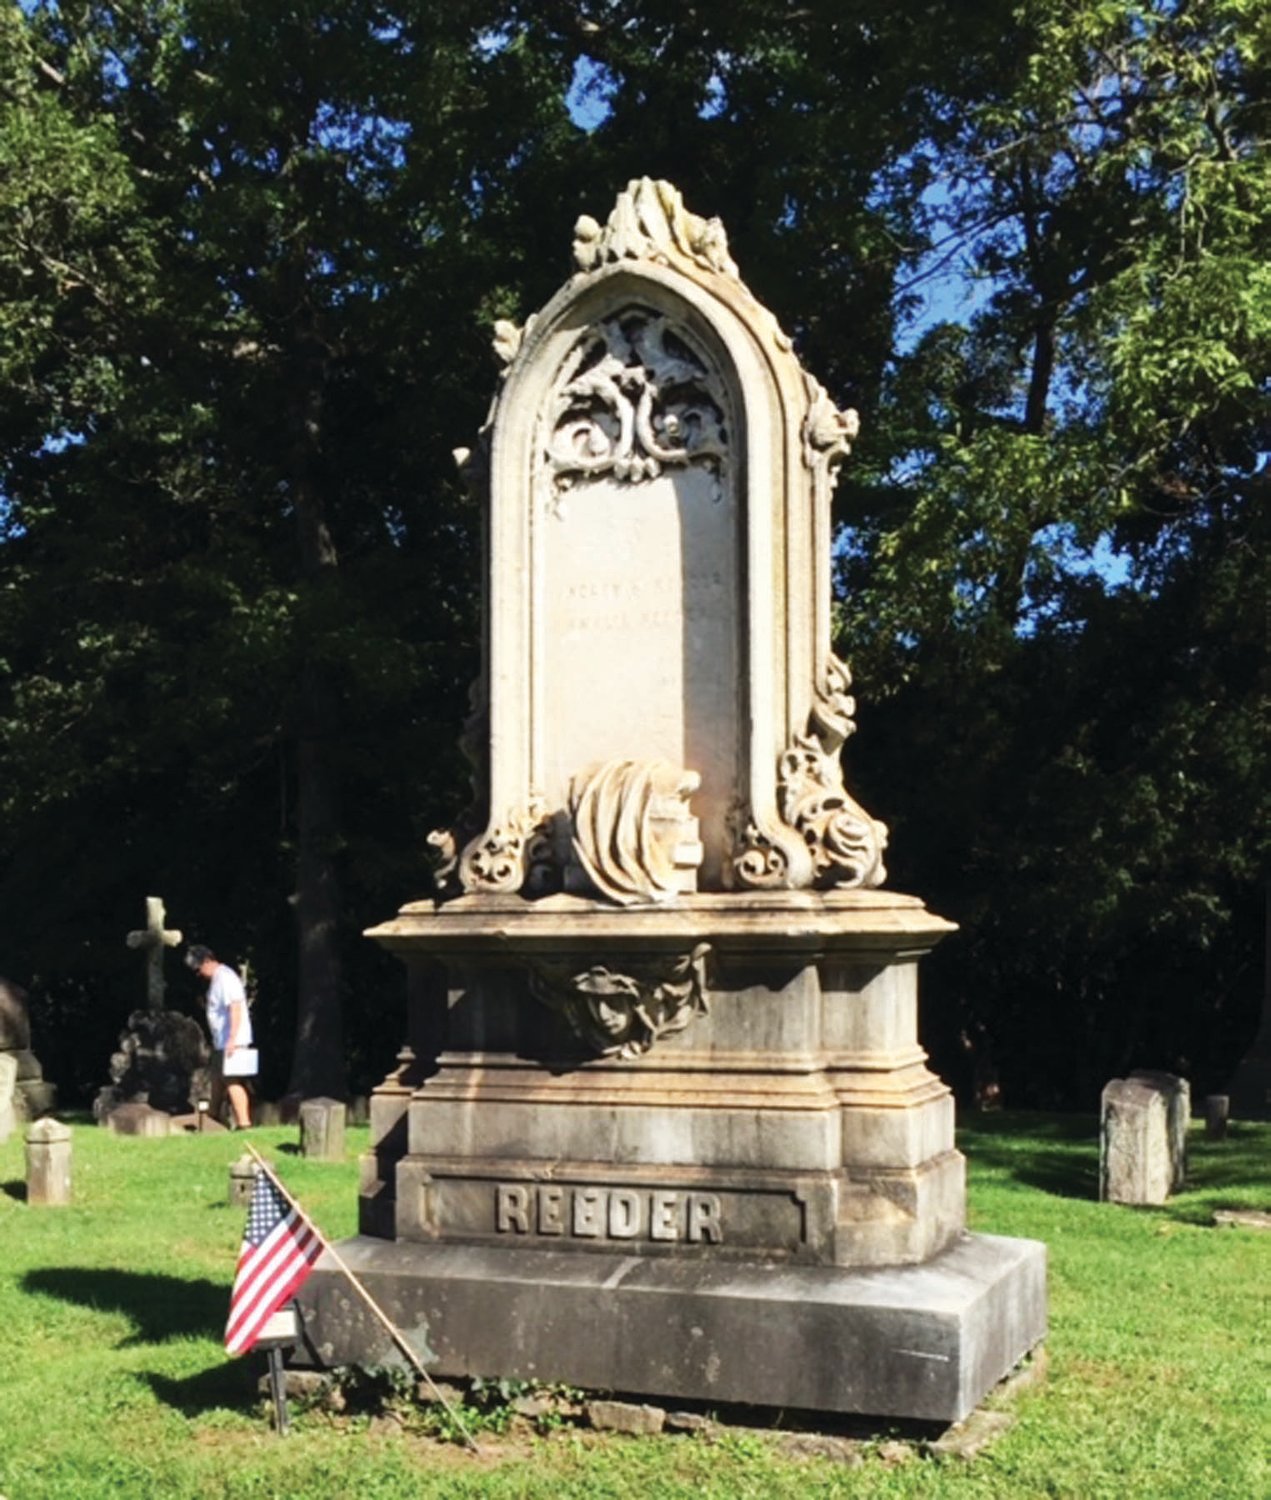 Andrew Reeder, former governor of the Kansas Territory, who later practiced law in Easton,  died in 1864.  His tombstone features books and mourning drapery indicating learning and sorrow. Photograph by Kathryn Finegan Clark